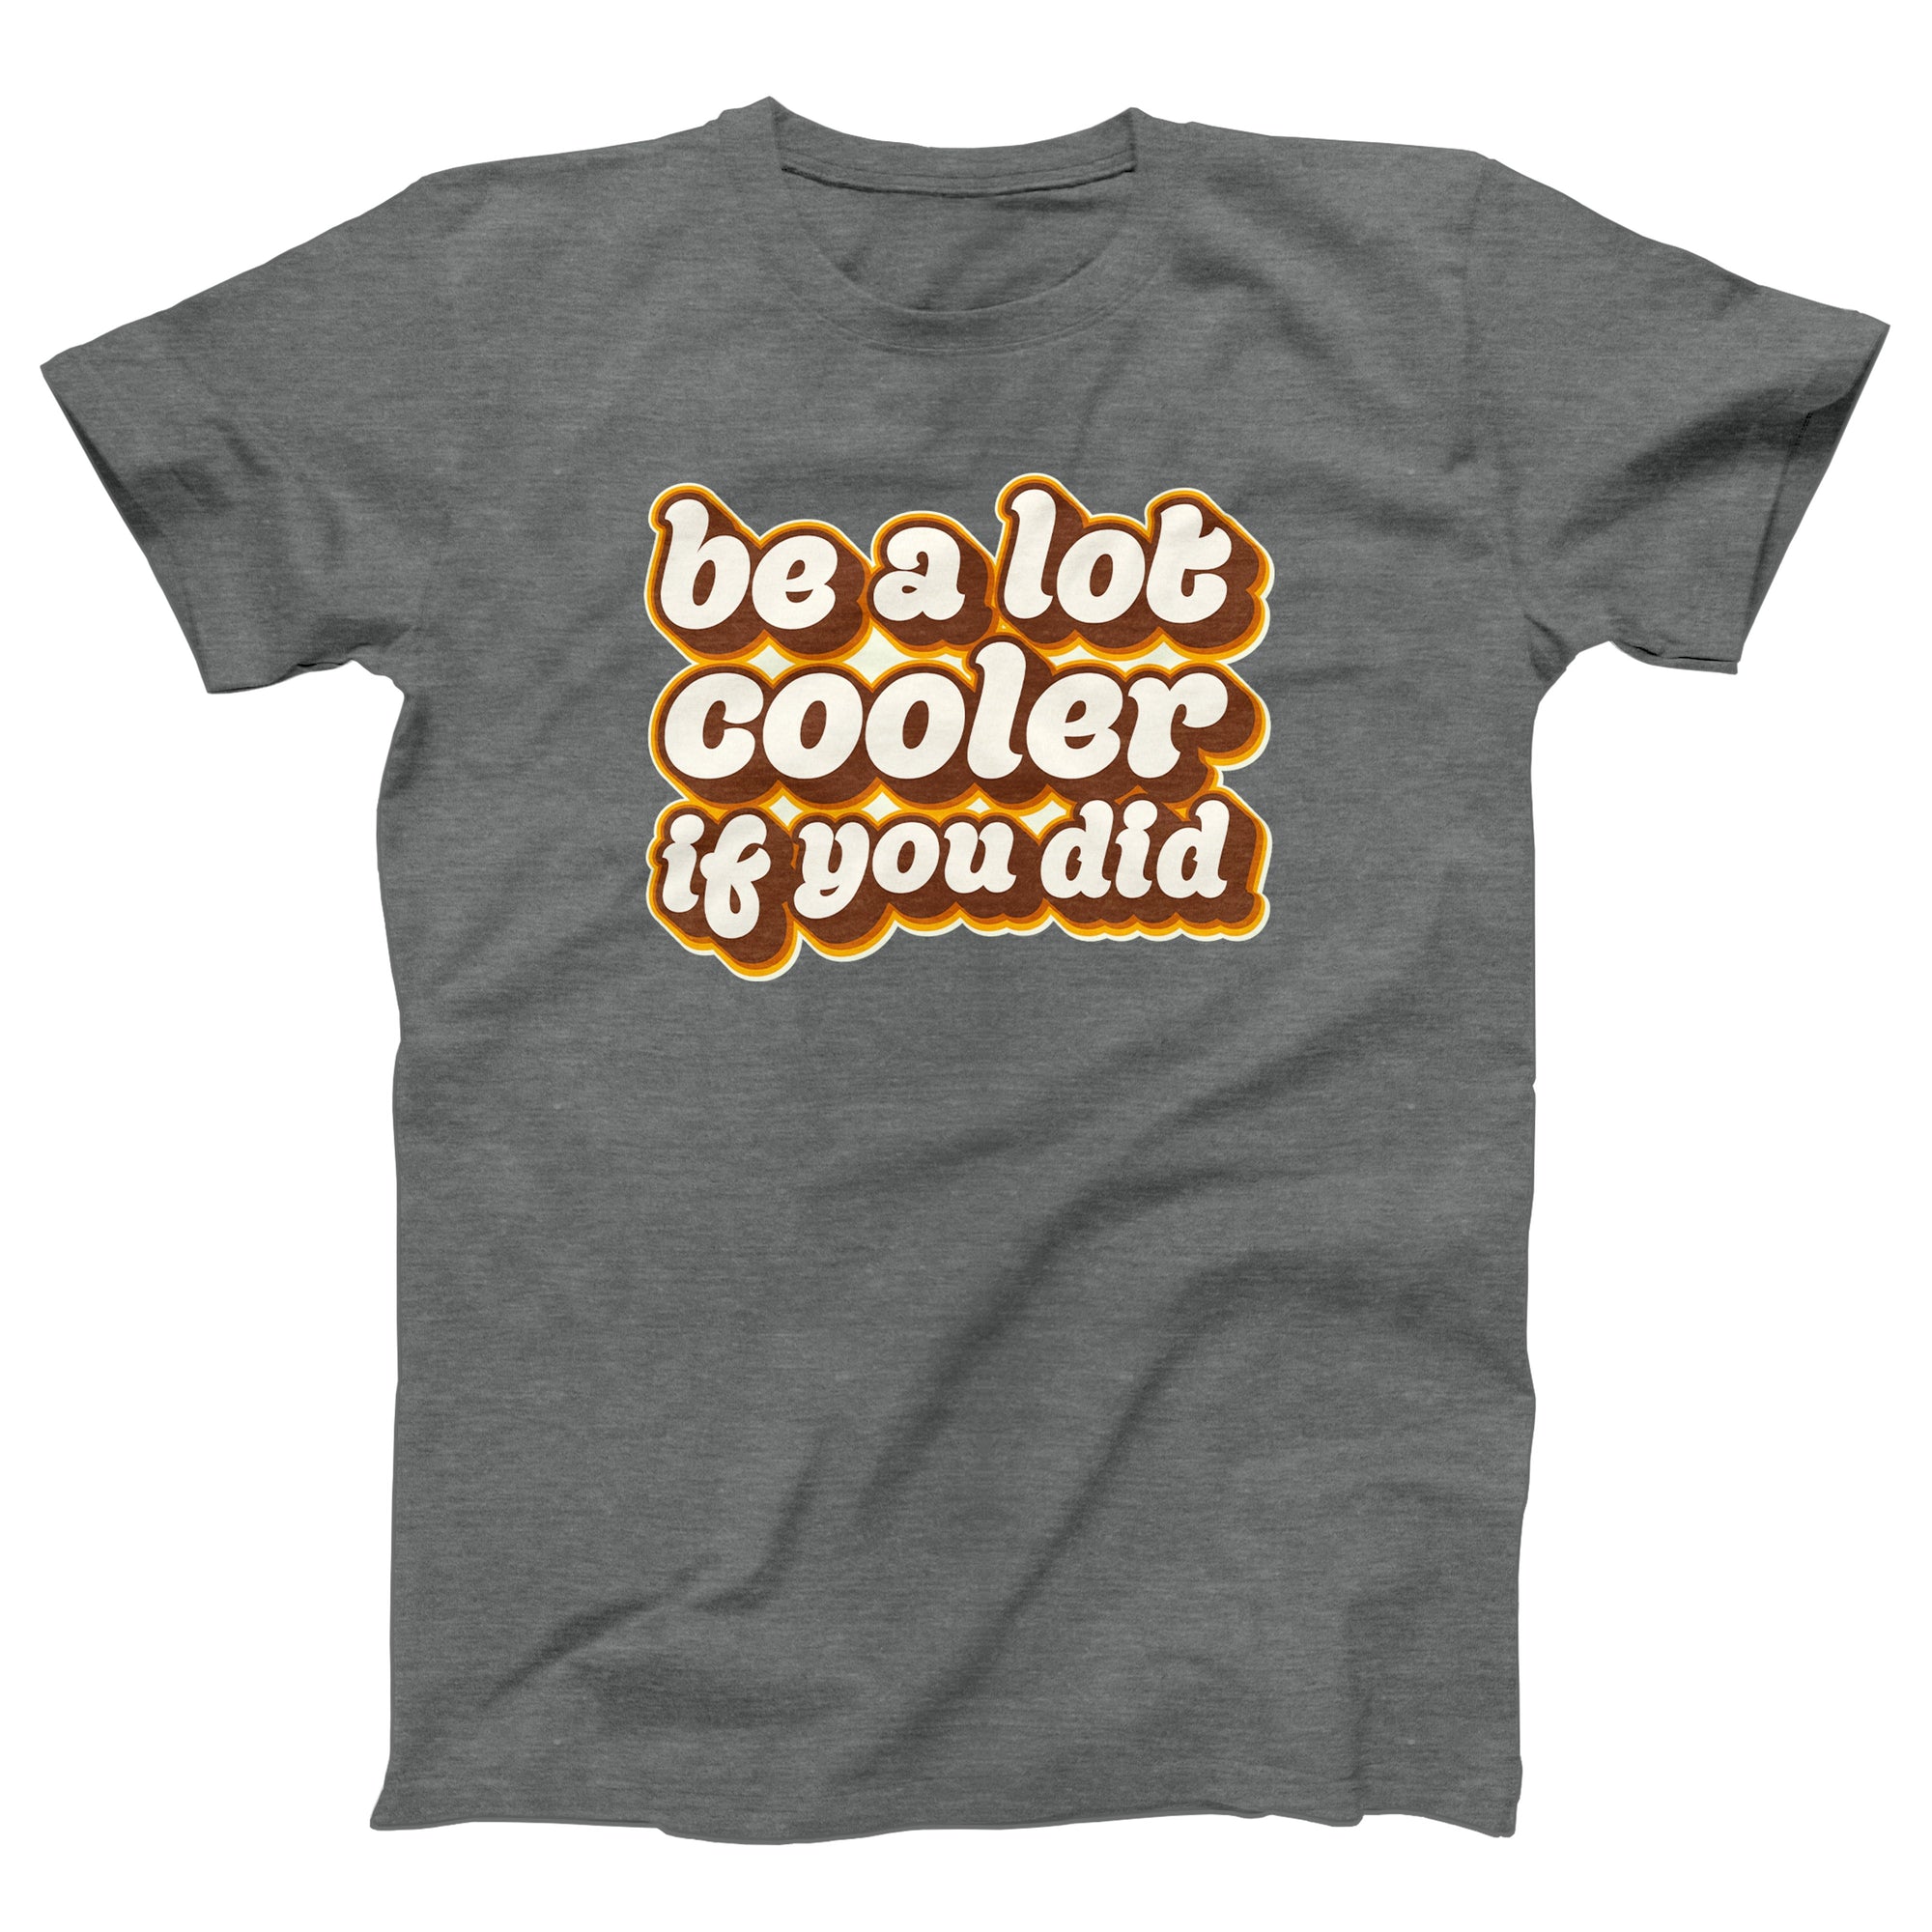 Be a Lot Cooler If You Did Adult Unisex T-Shirt - anishphilip